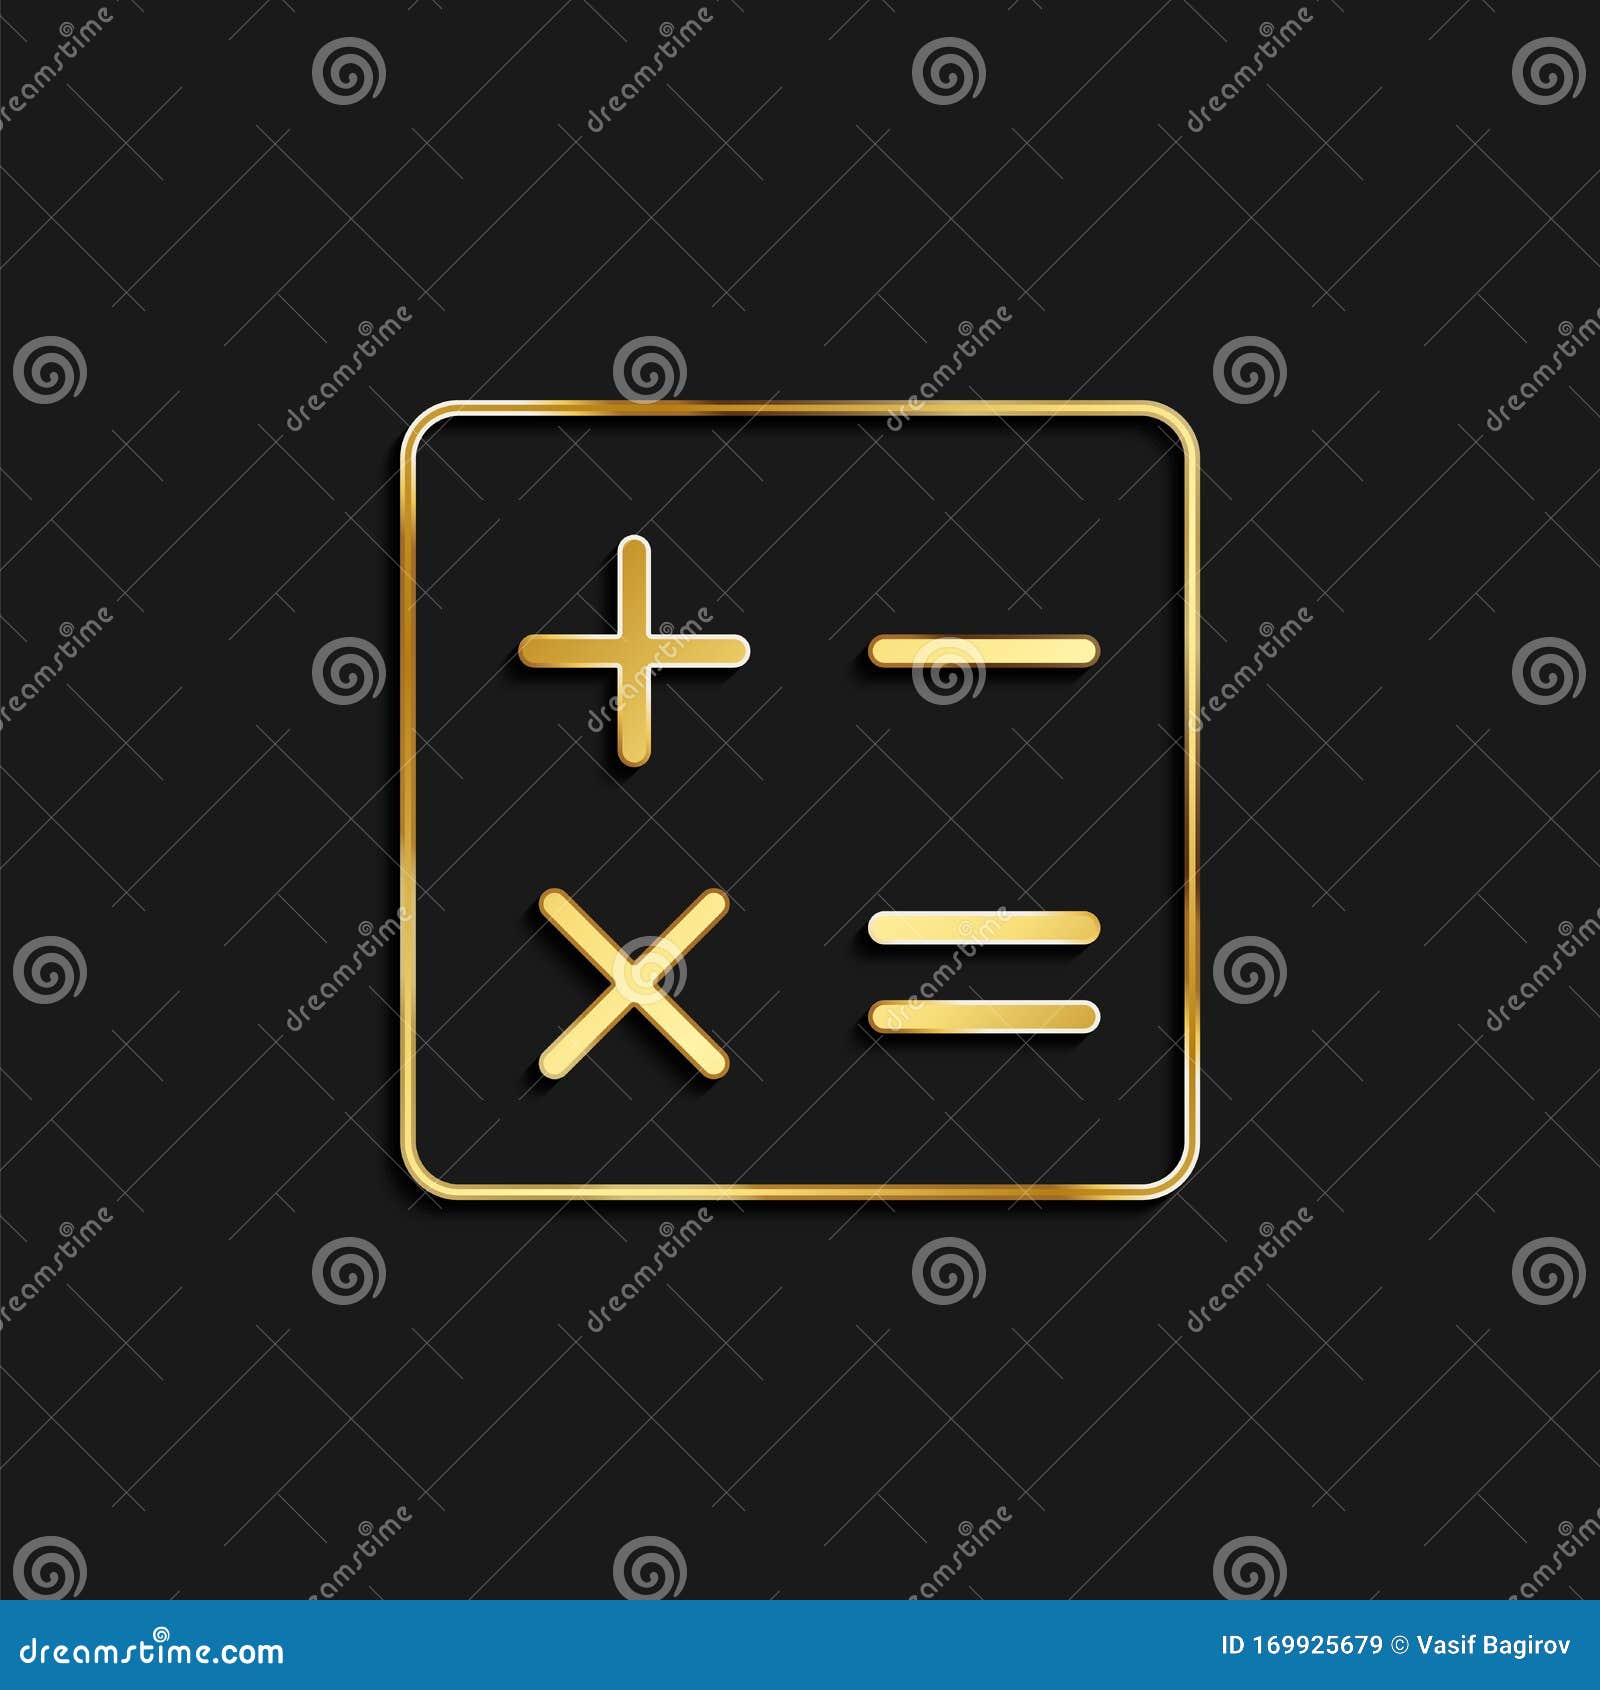 calc, calculator, math gold icon.   of golden particle background